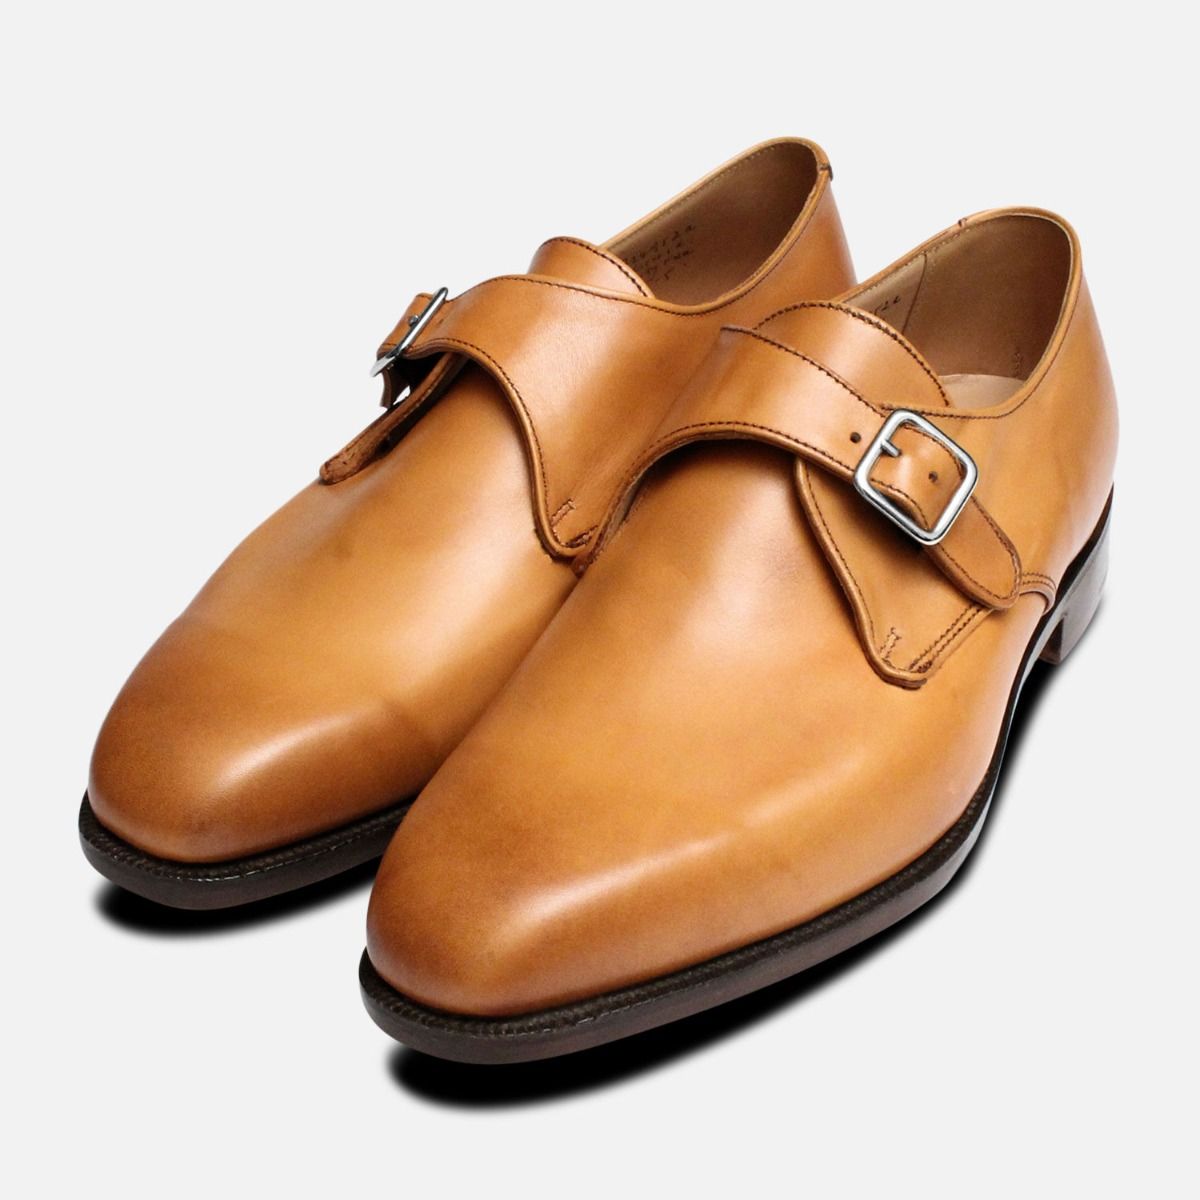 Mayfair Burnished Tan Trickers Monk Shoe